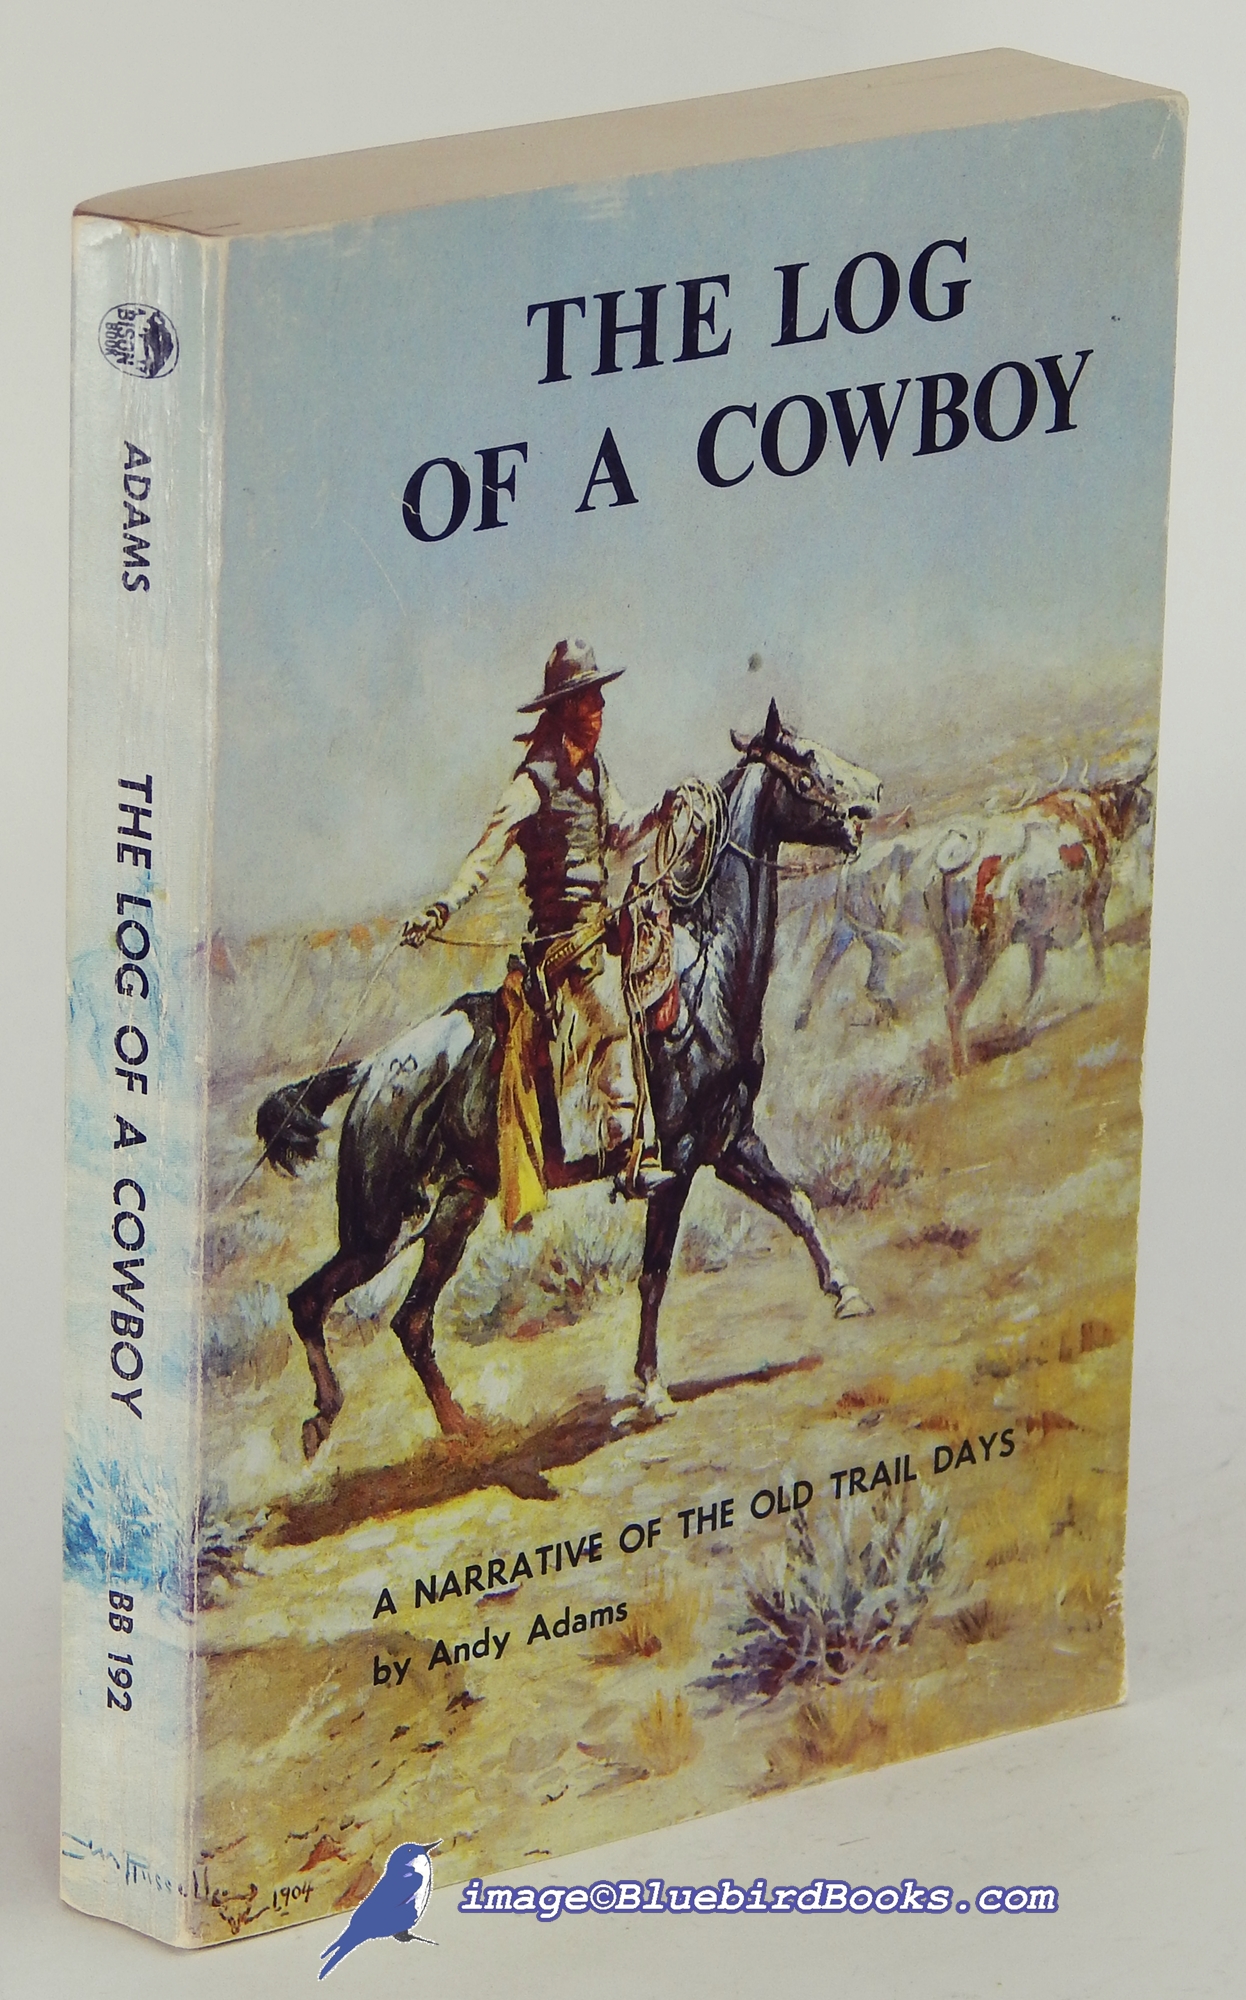 ADAMS, ANDY - The Log of a Cowboy: A Narrative of the Old Trail Days